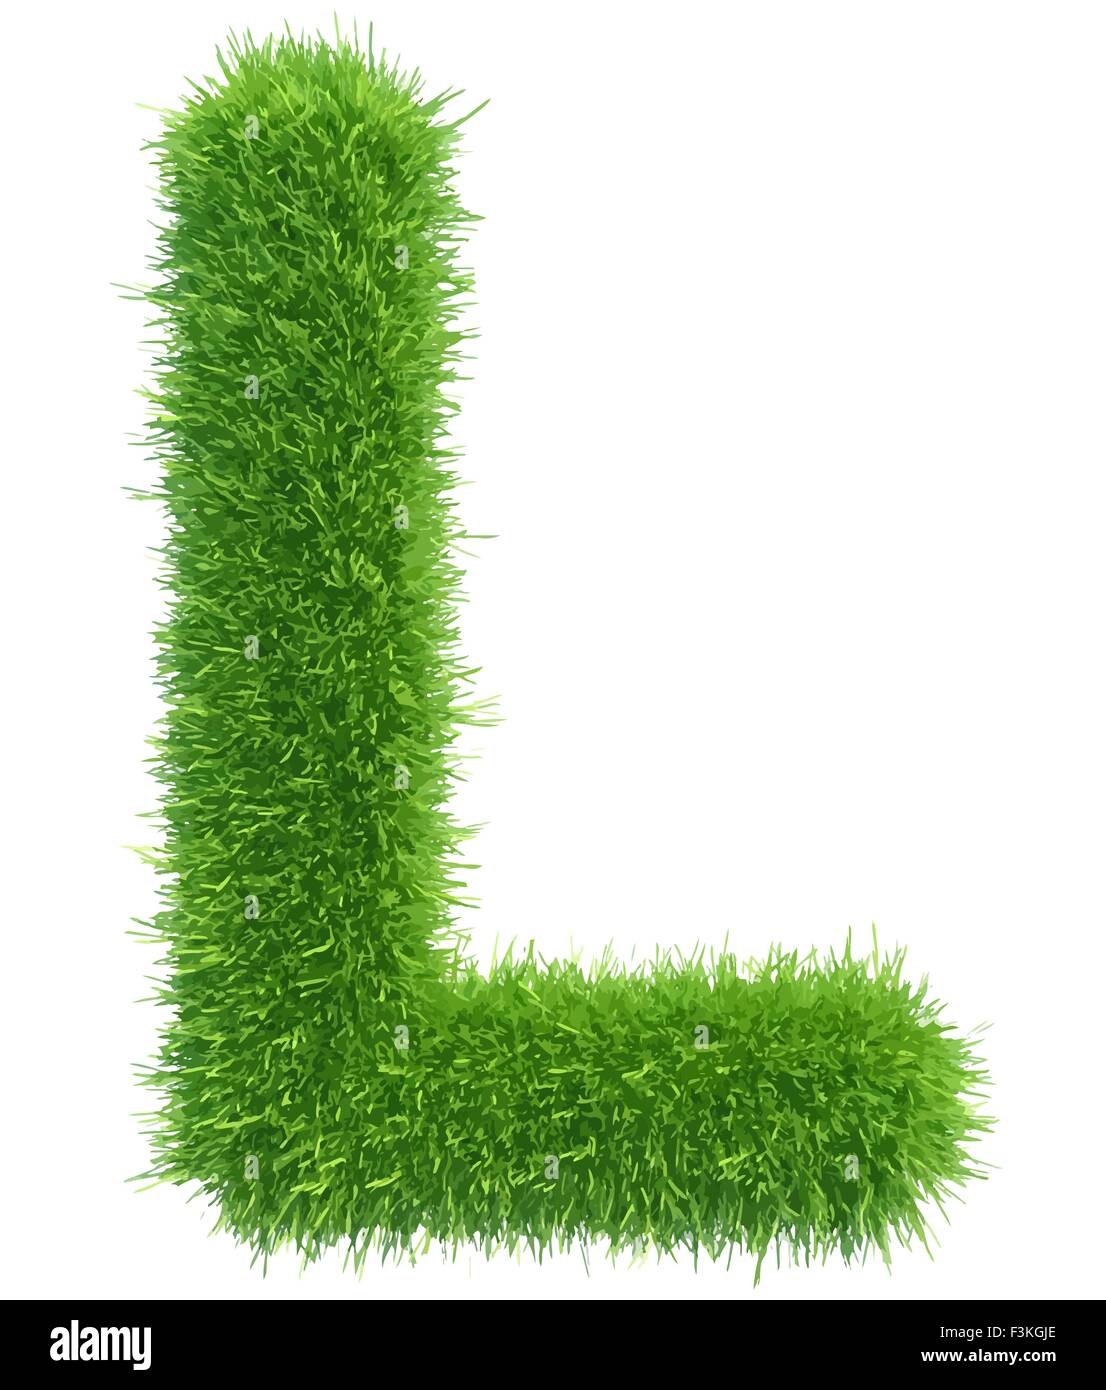 Vector capital letter L from grass on white background Stock Vector ...